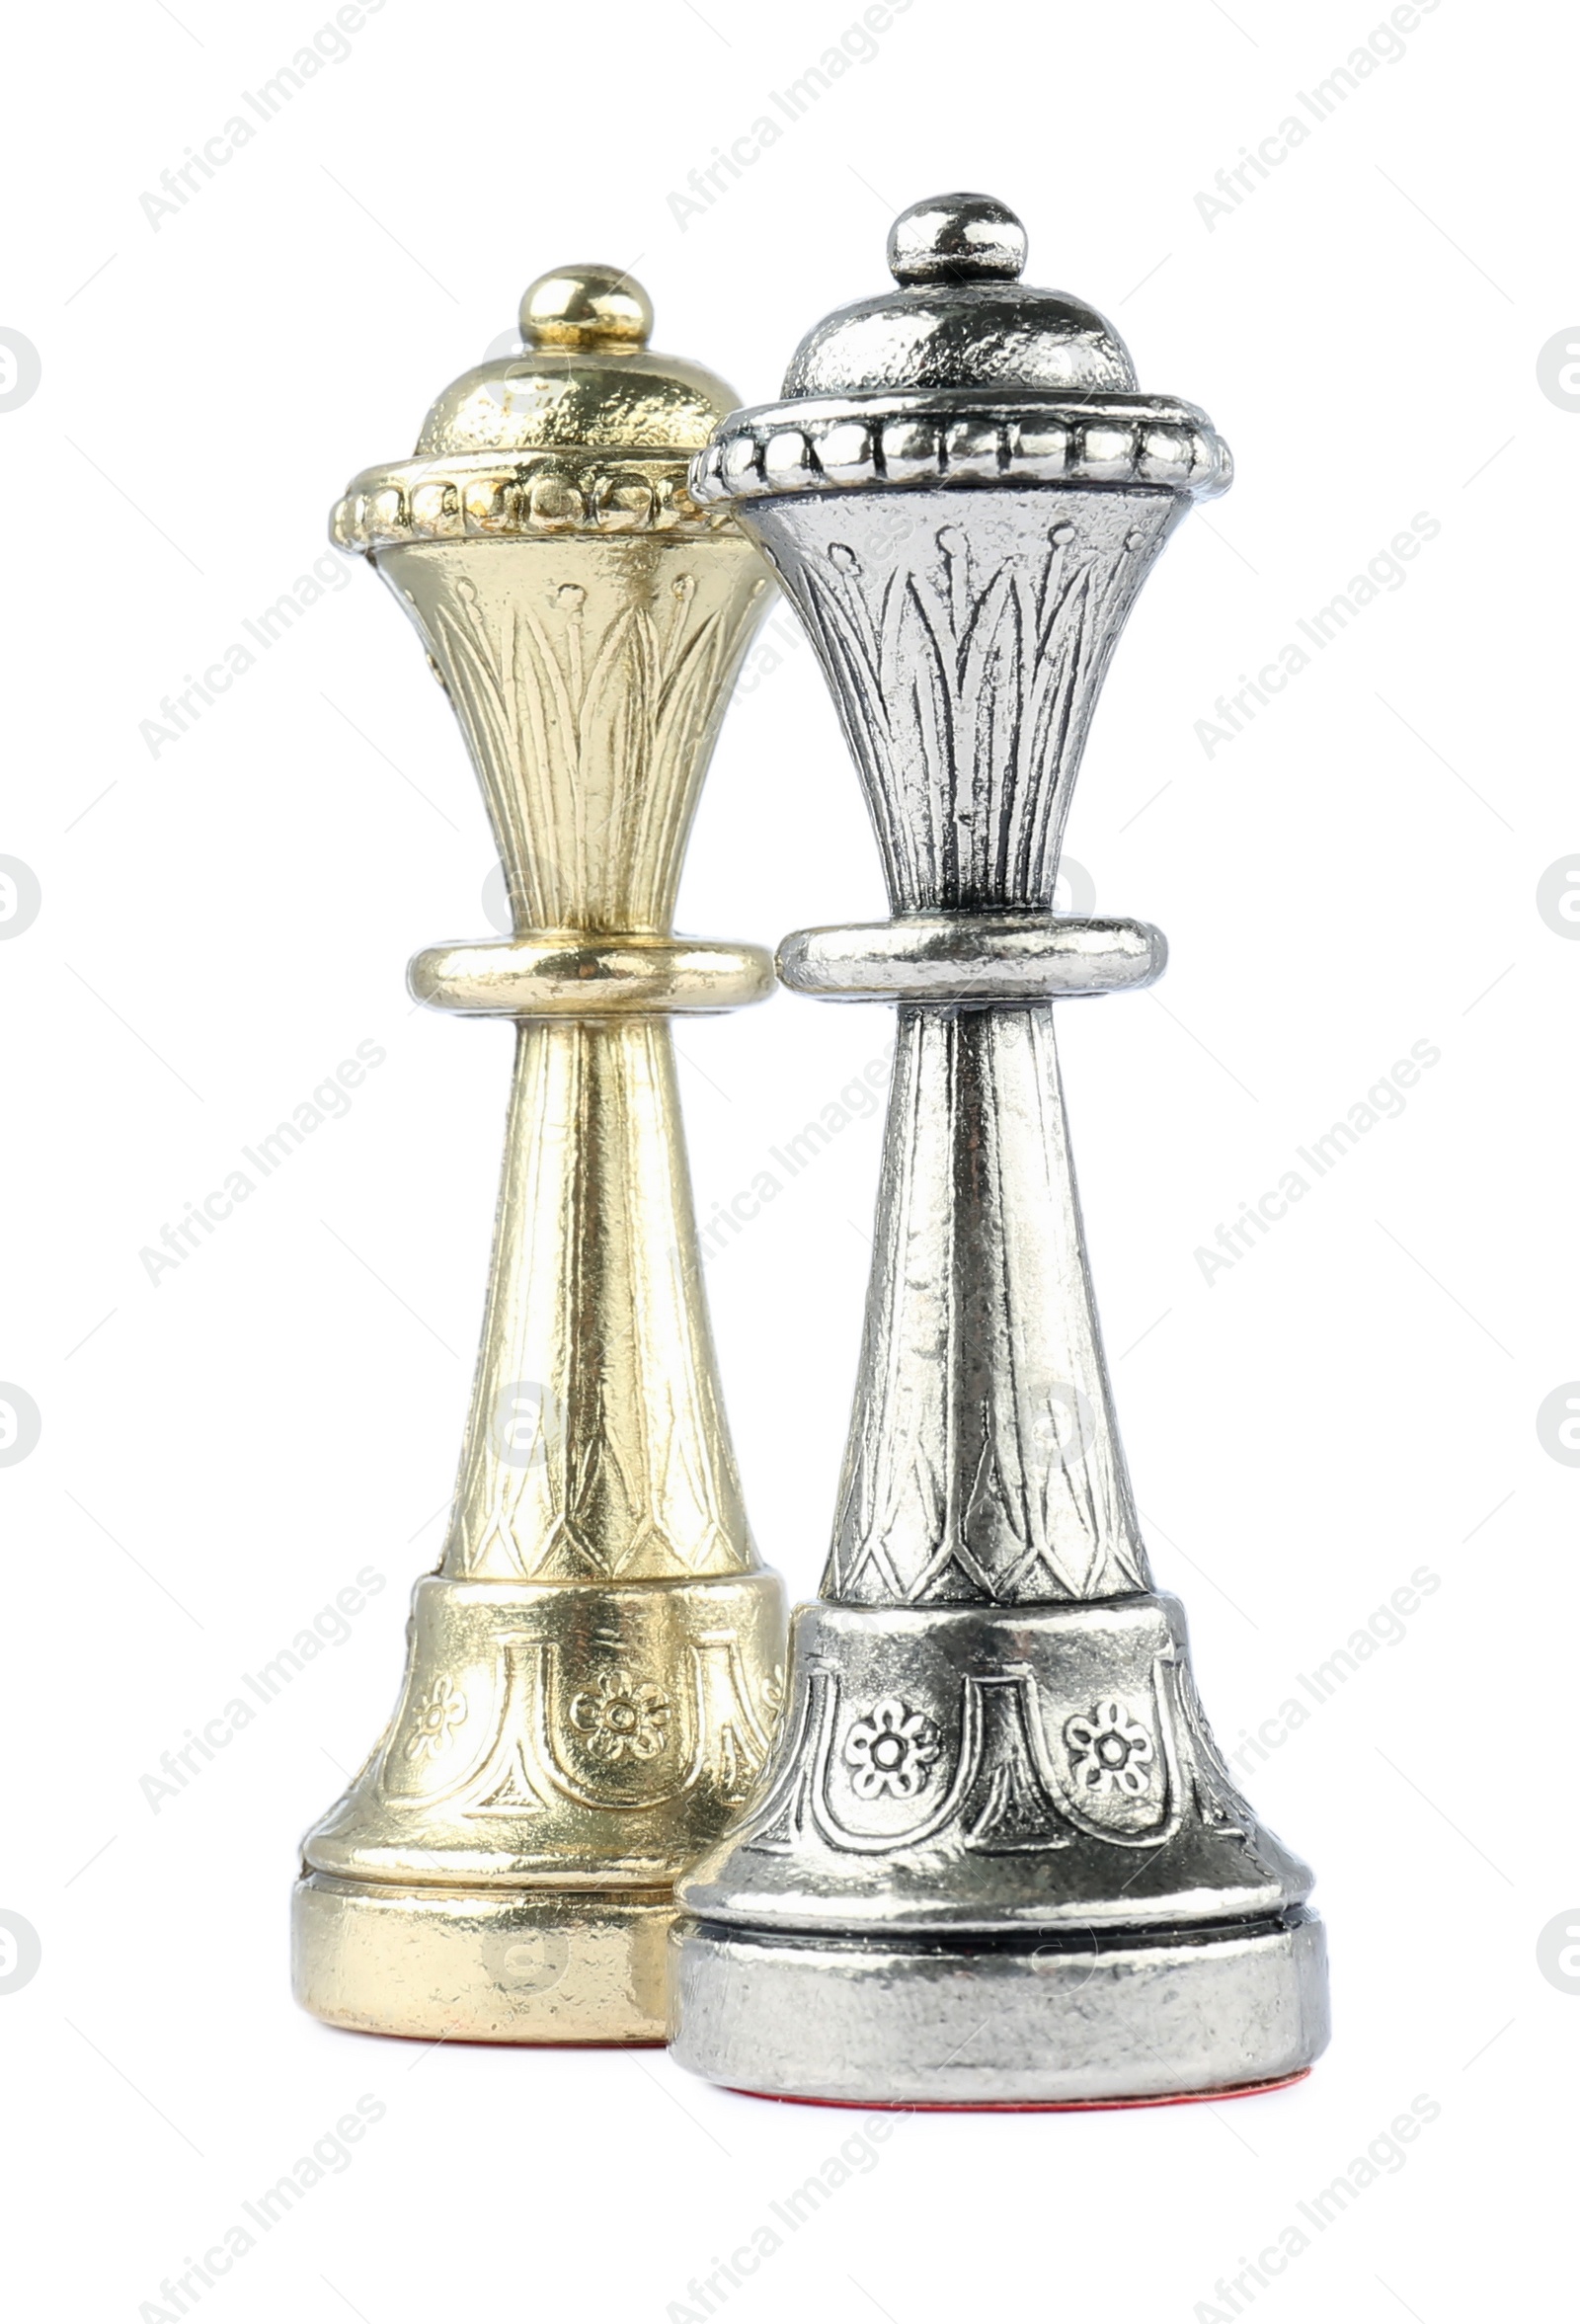 Photo of Silver and golden queens on white background. Chess pieces